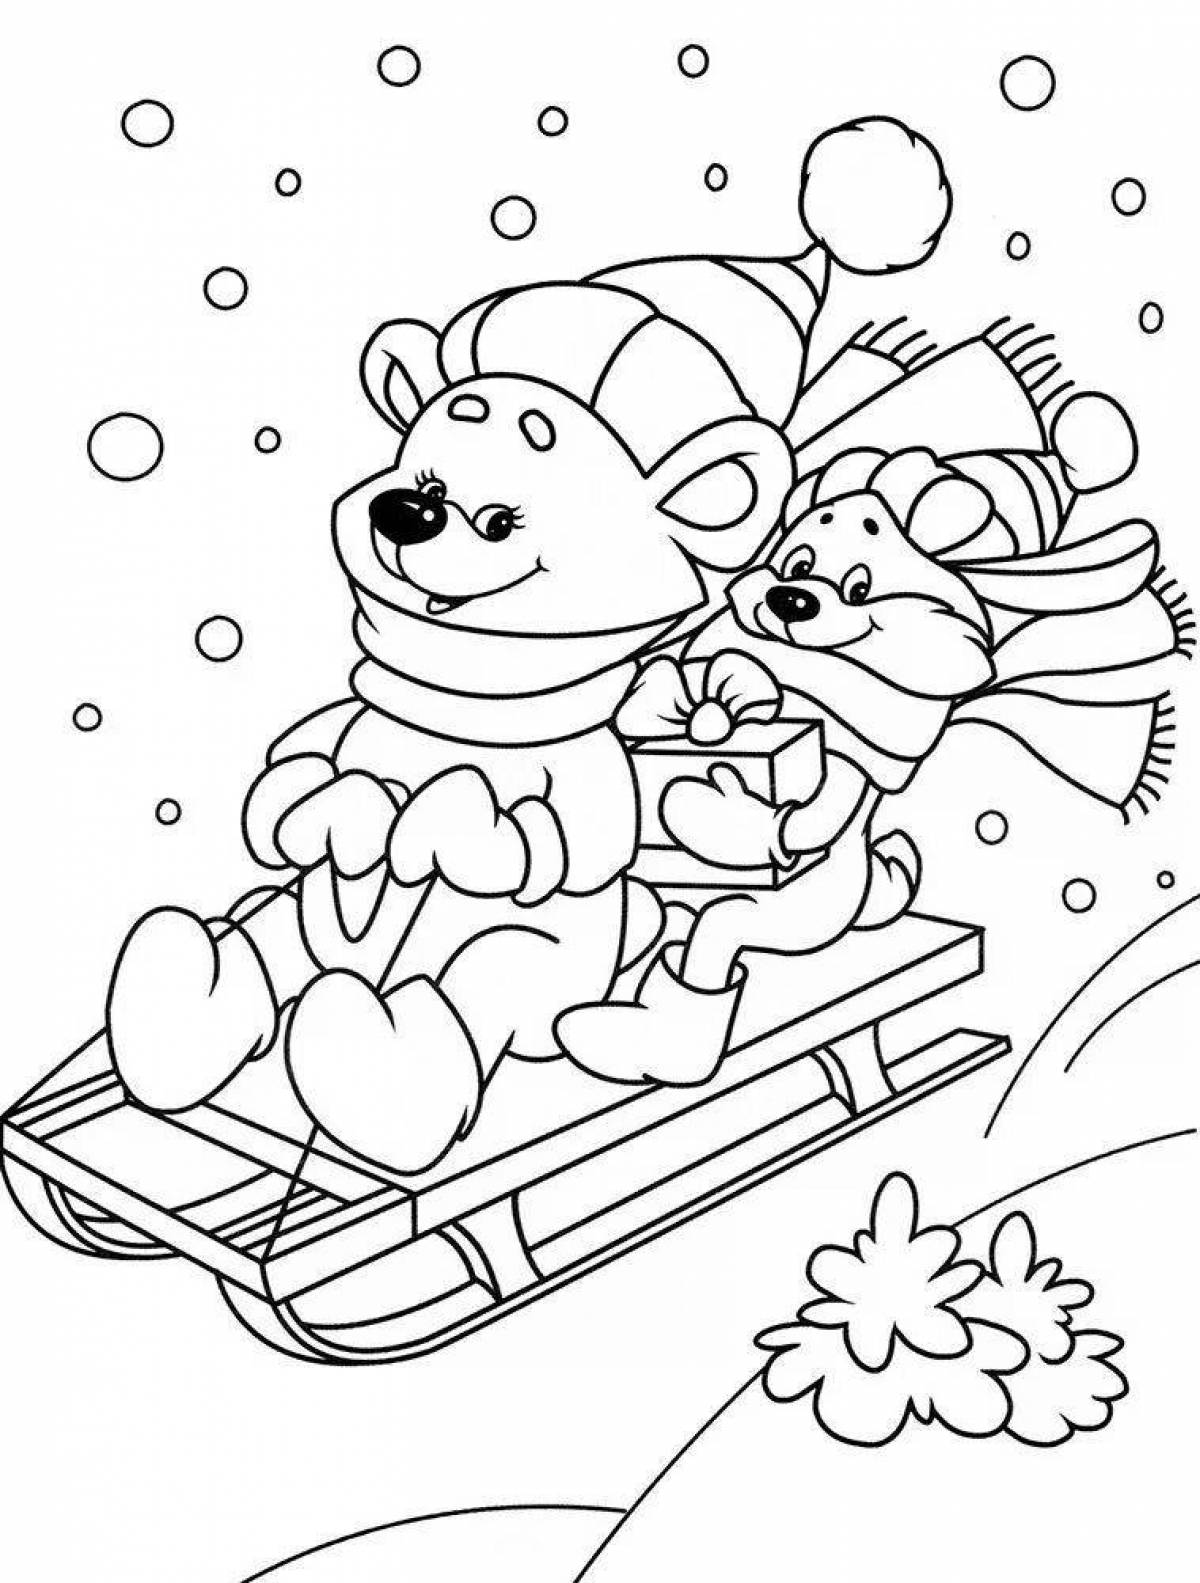 Holiday coloring book for children 3 years old winter